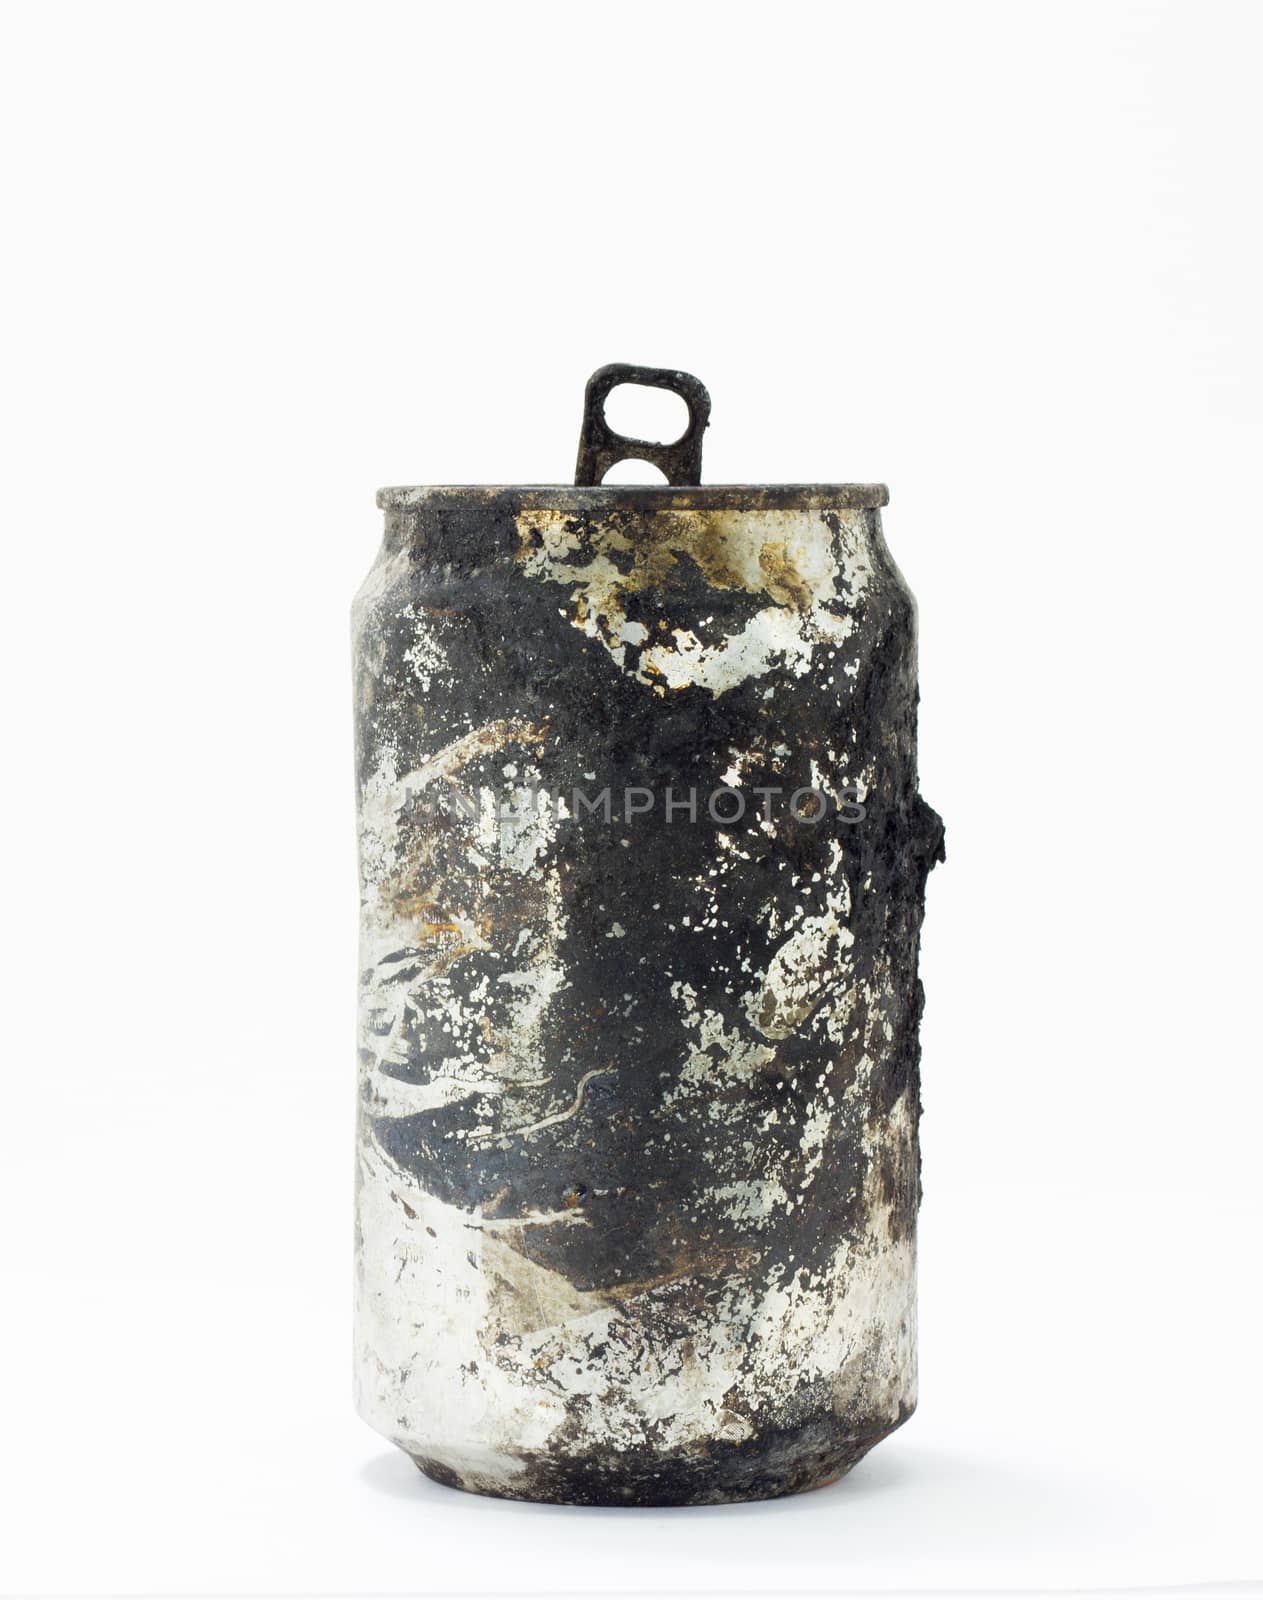 burnt cola can in white background full of fire ash and dirty